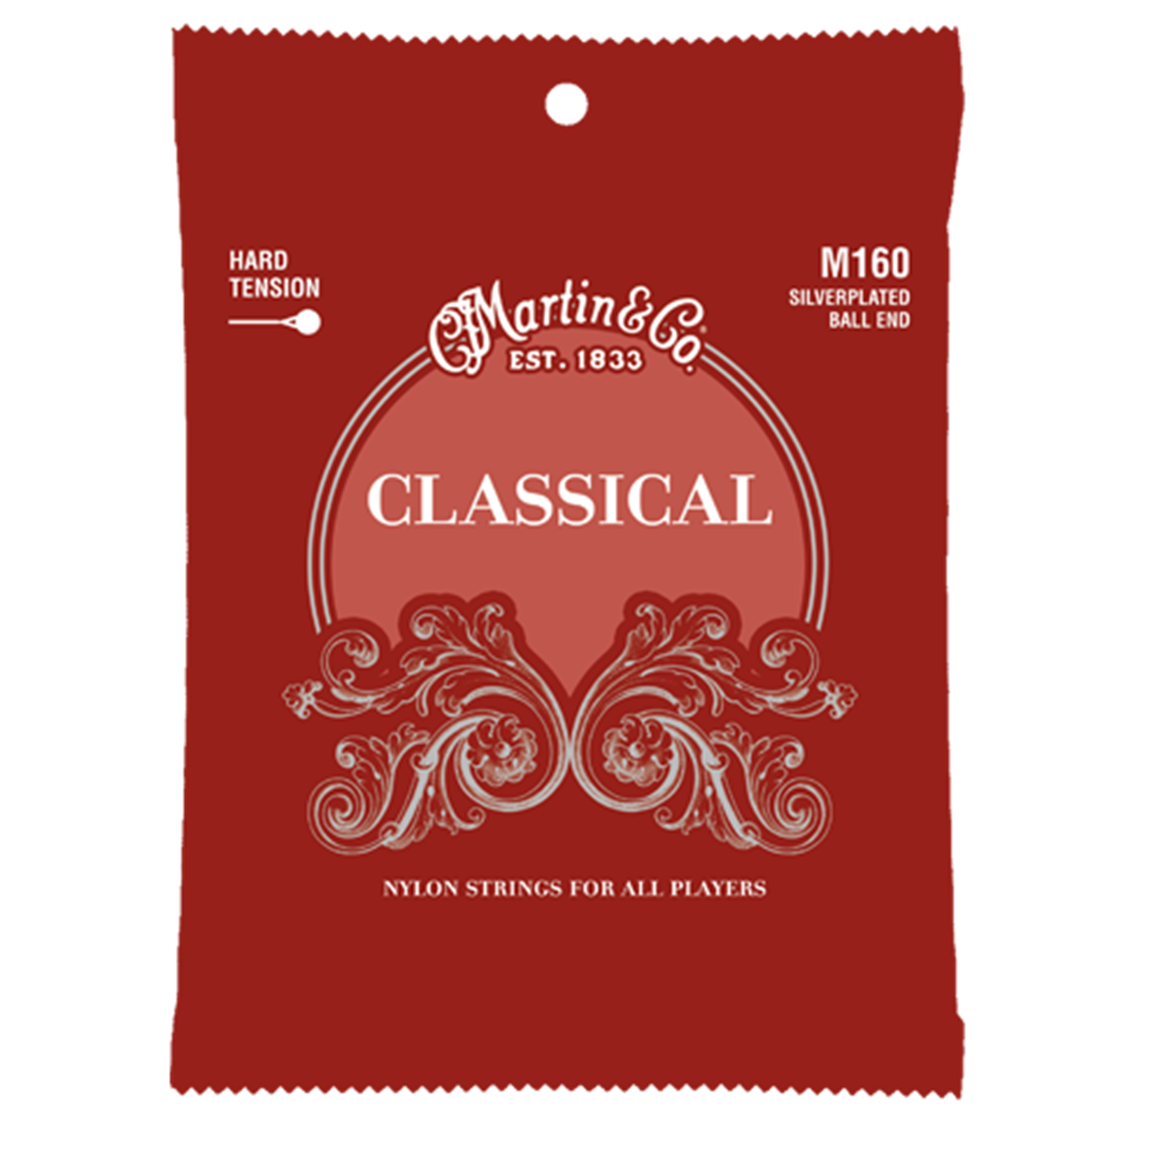 MARTIN M160 Silverplated Ball End Classical Guitar Strings